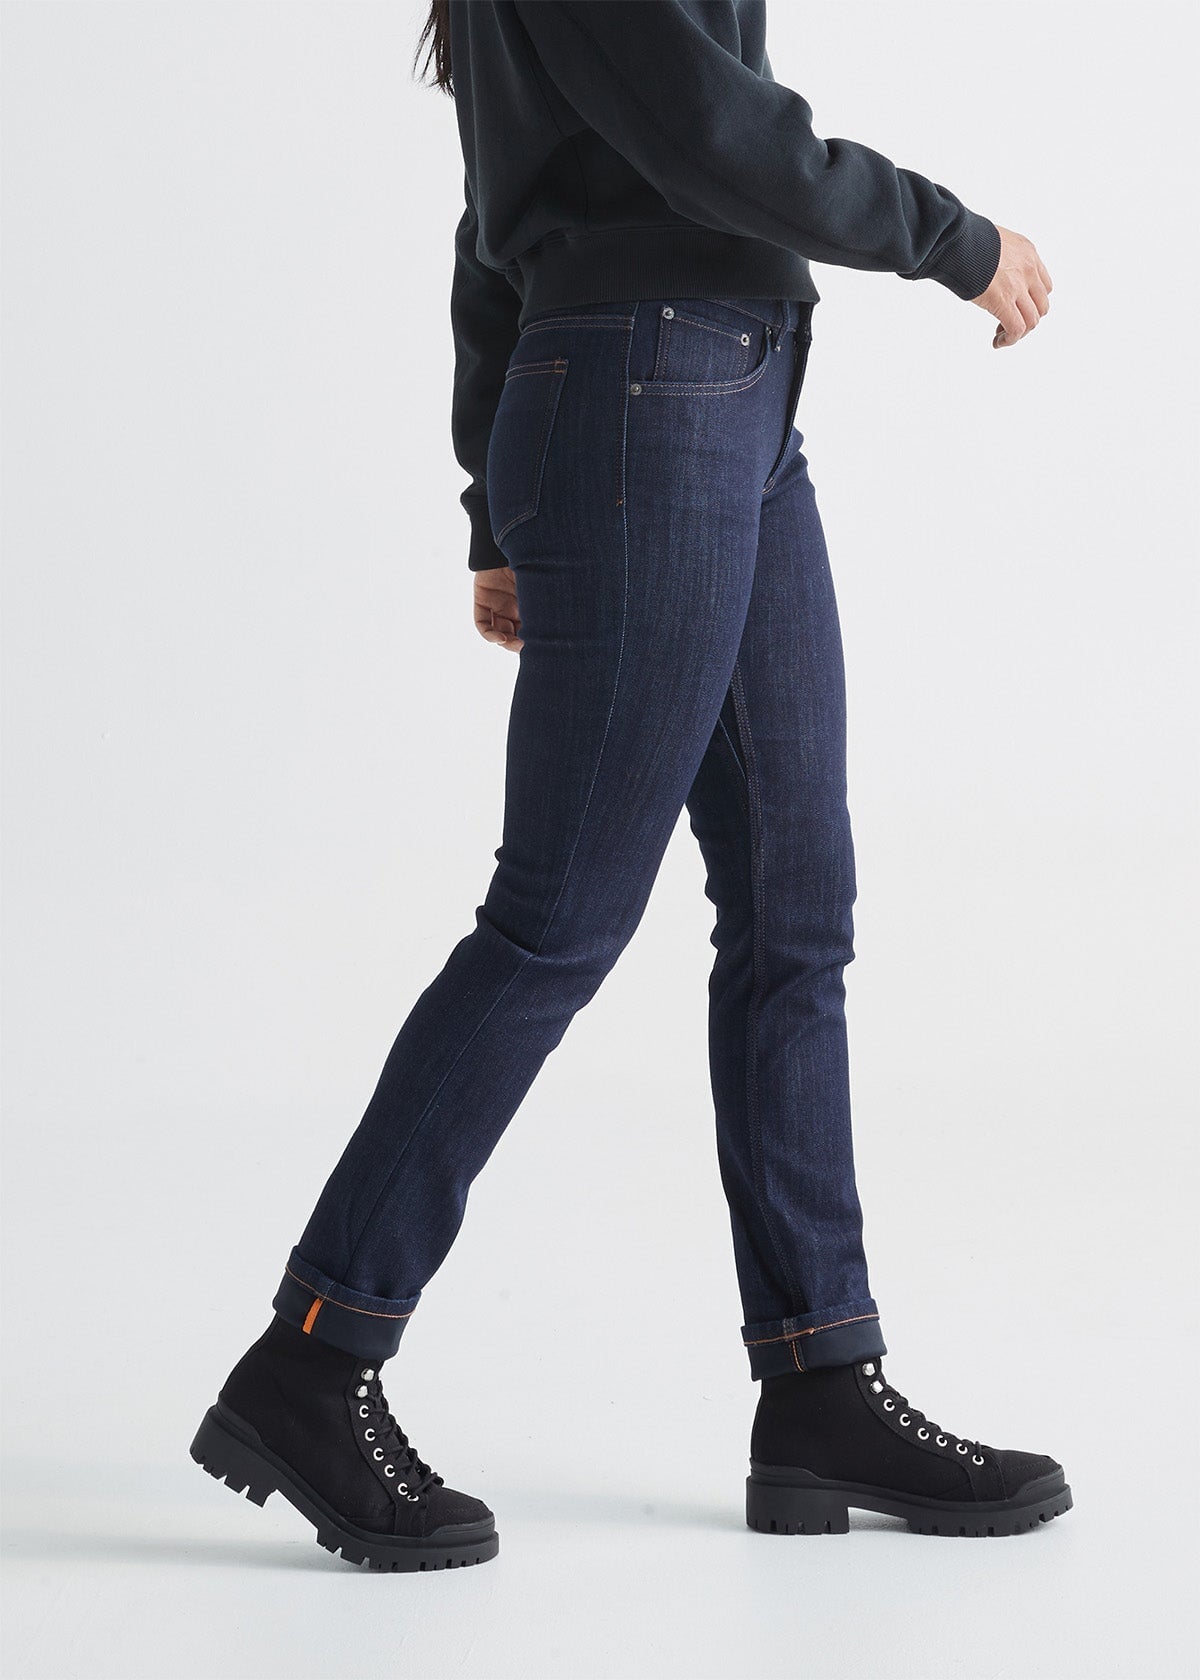 Solid Denim Relaxed Fit Women's Casual Pants